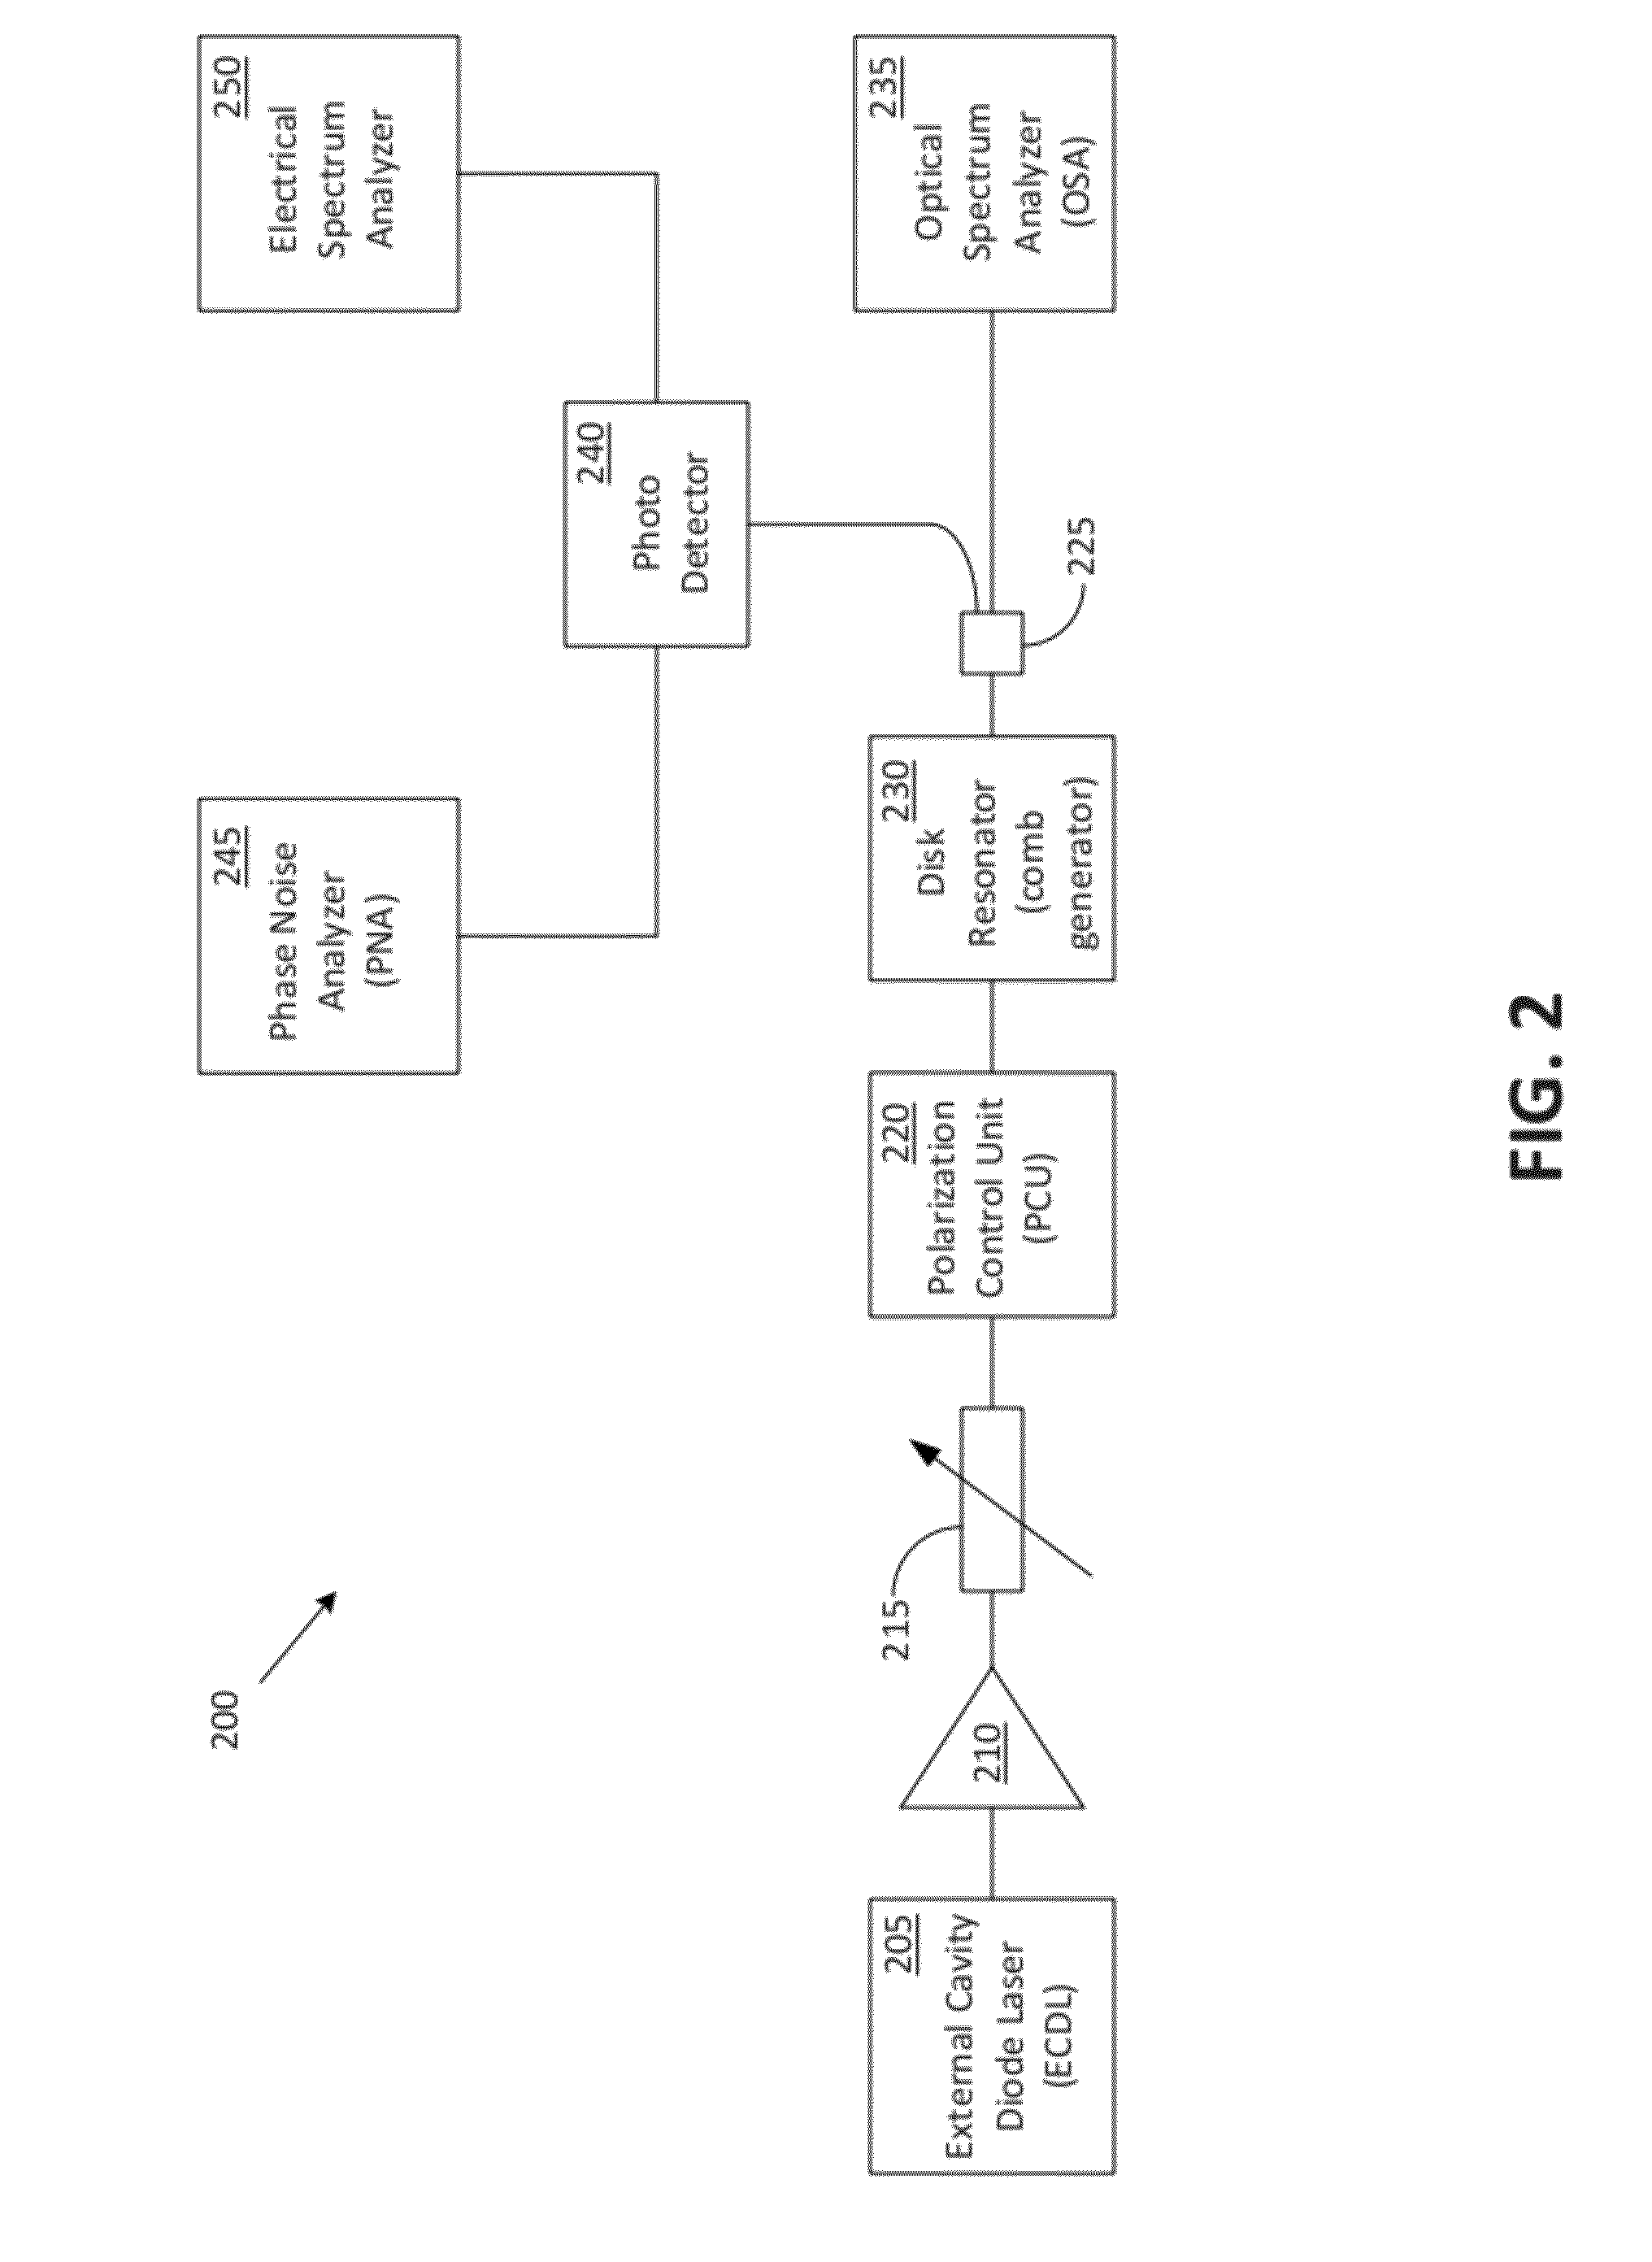 Chip-based frequency comb generator with microwave repetition rate